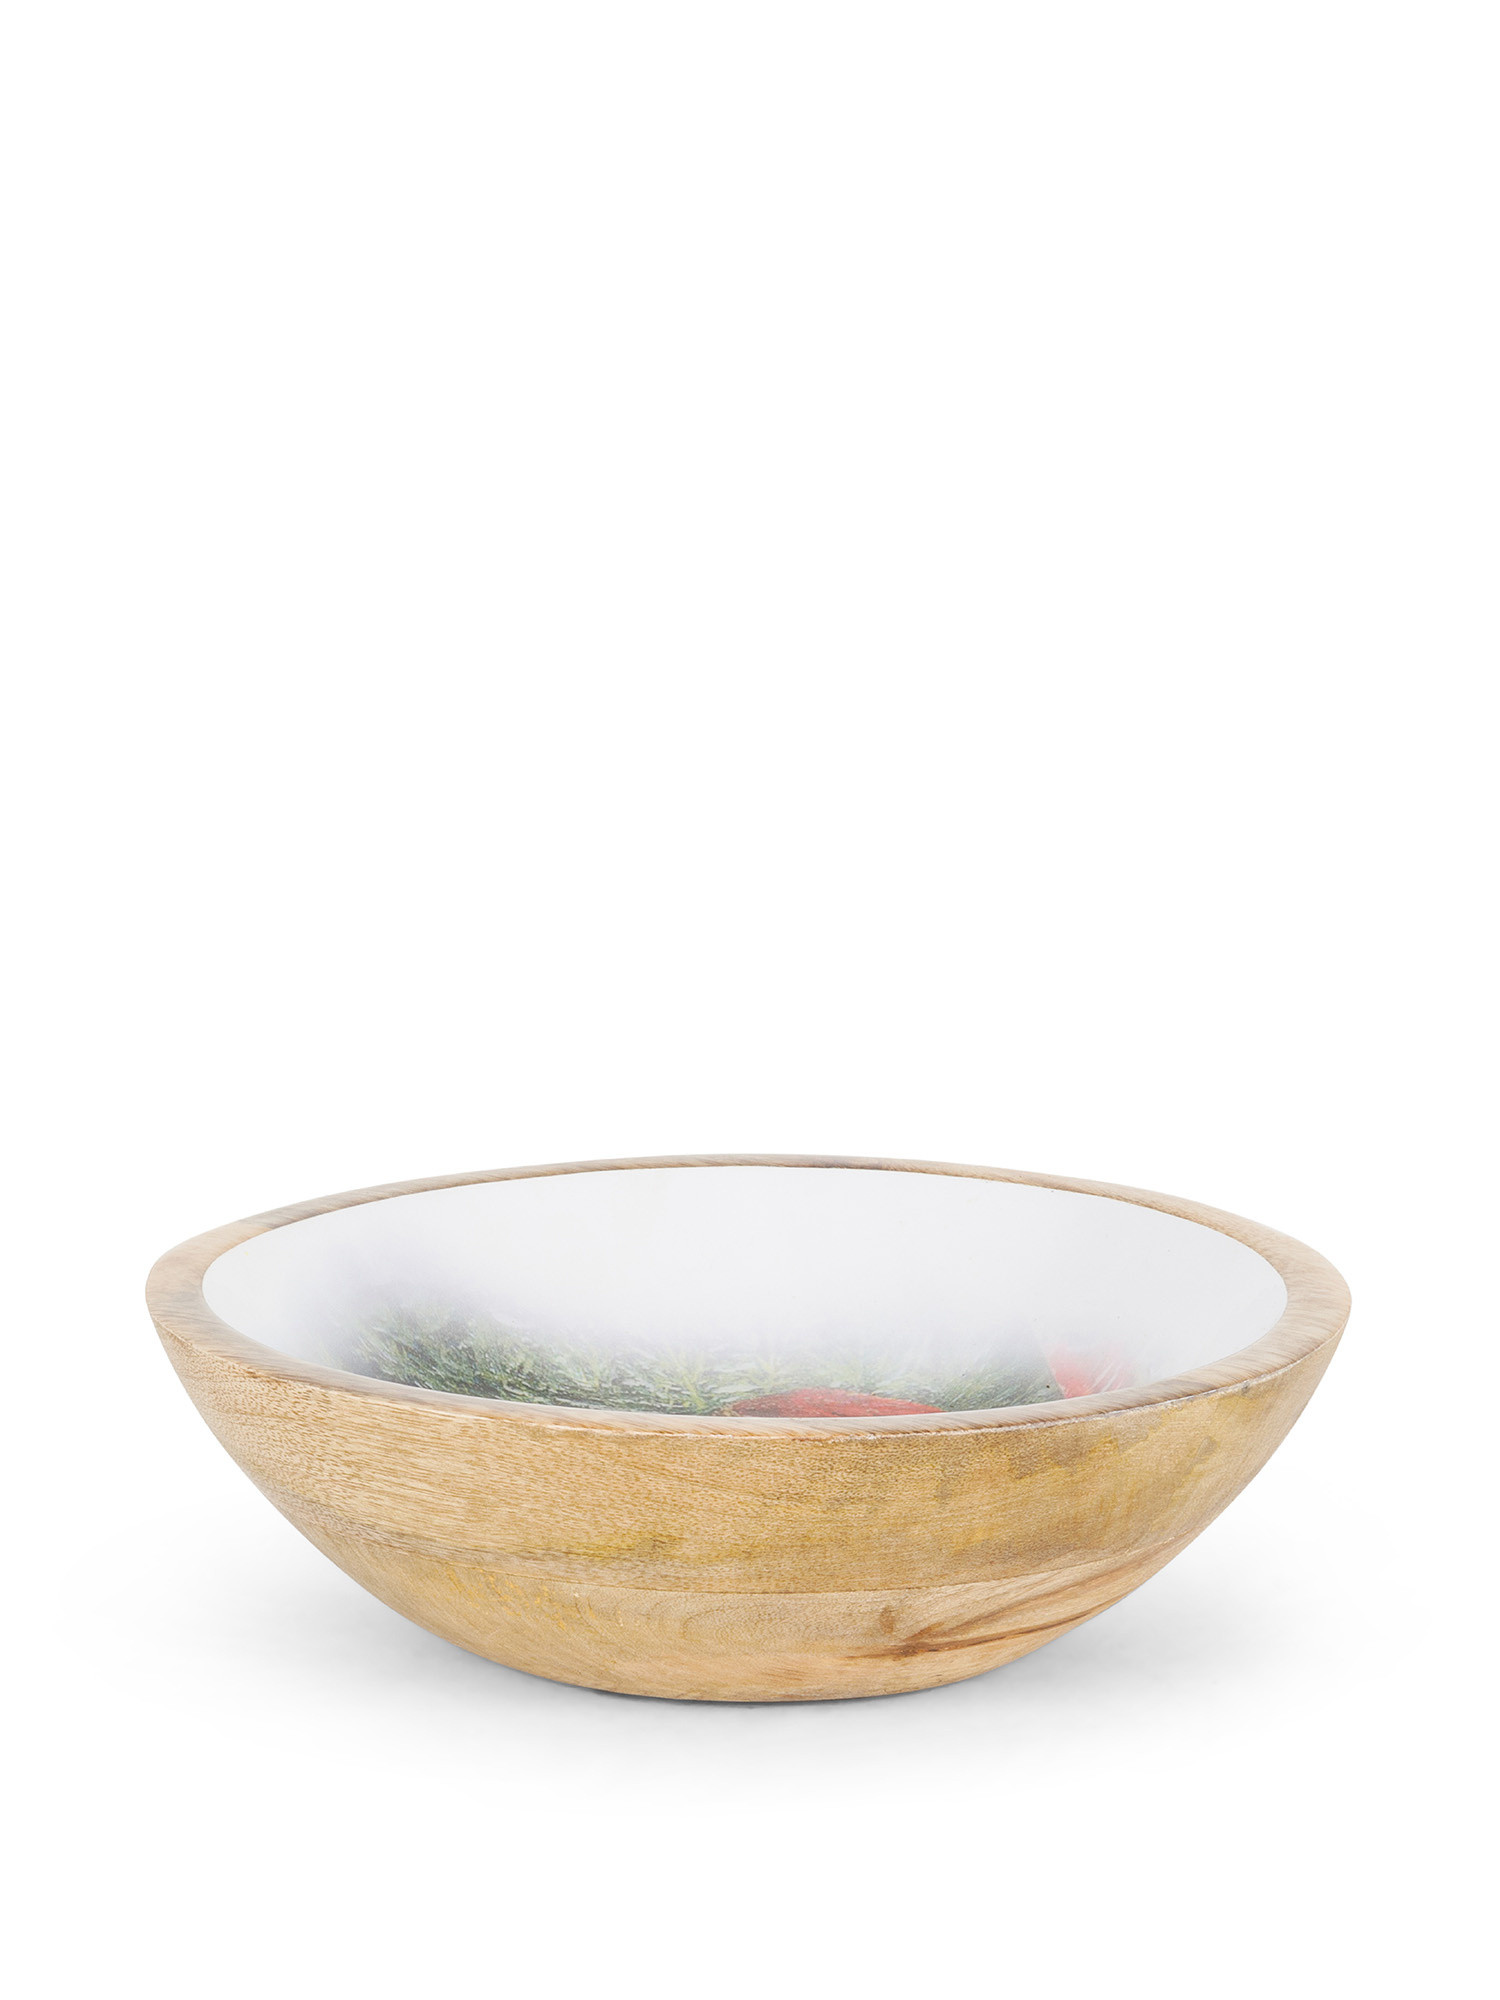 Cup with wooden decoration, Multicolor, large image number 0